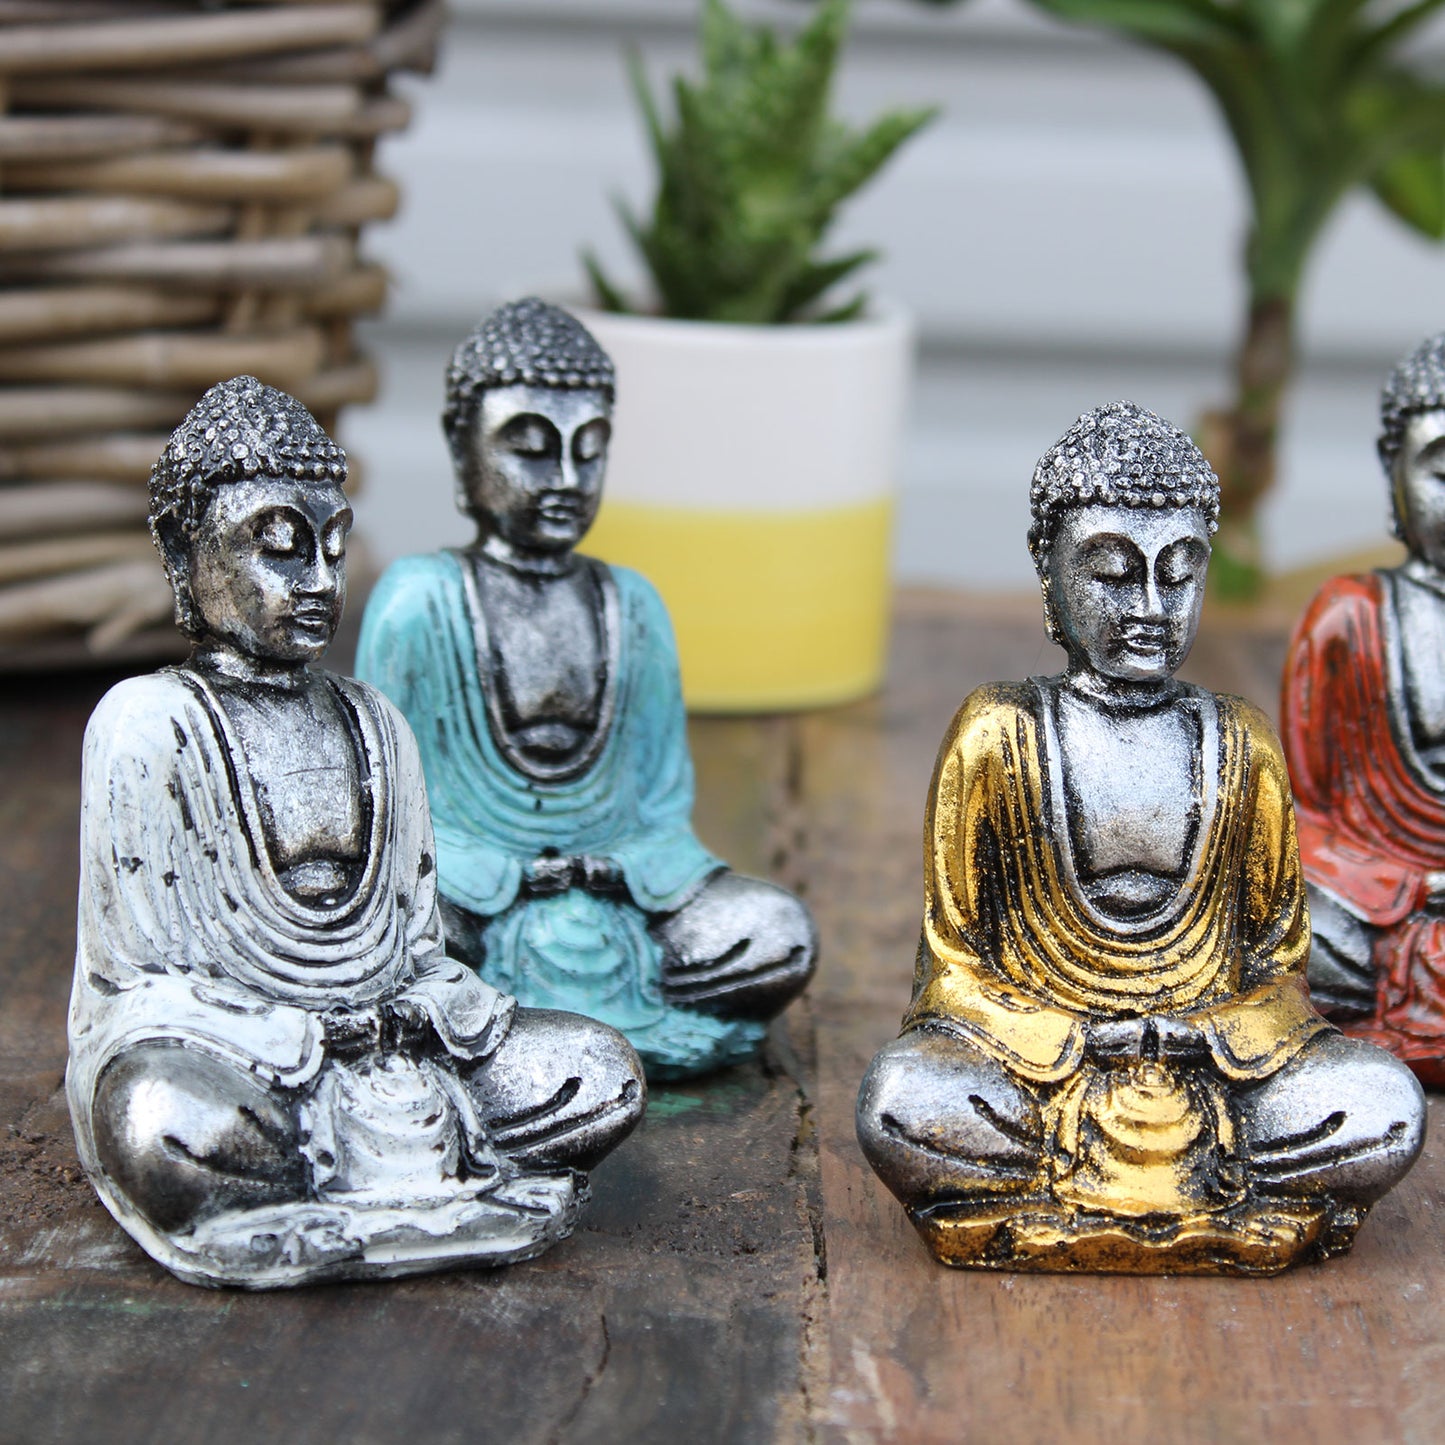 Silver Mini Buddha Statues- Set of 6 Assorted Colors - Cosmic Serenity Shop